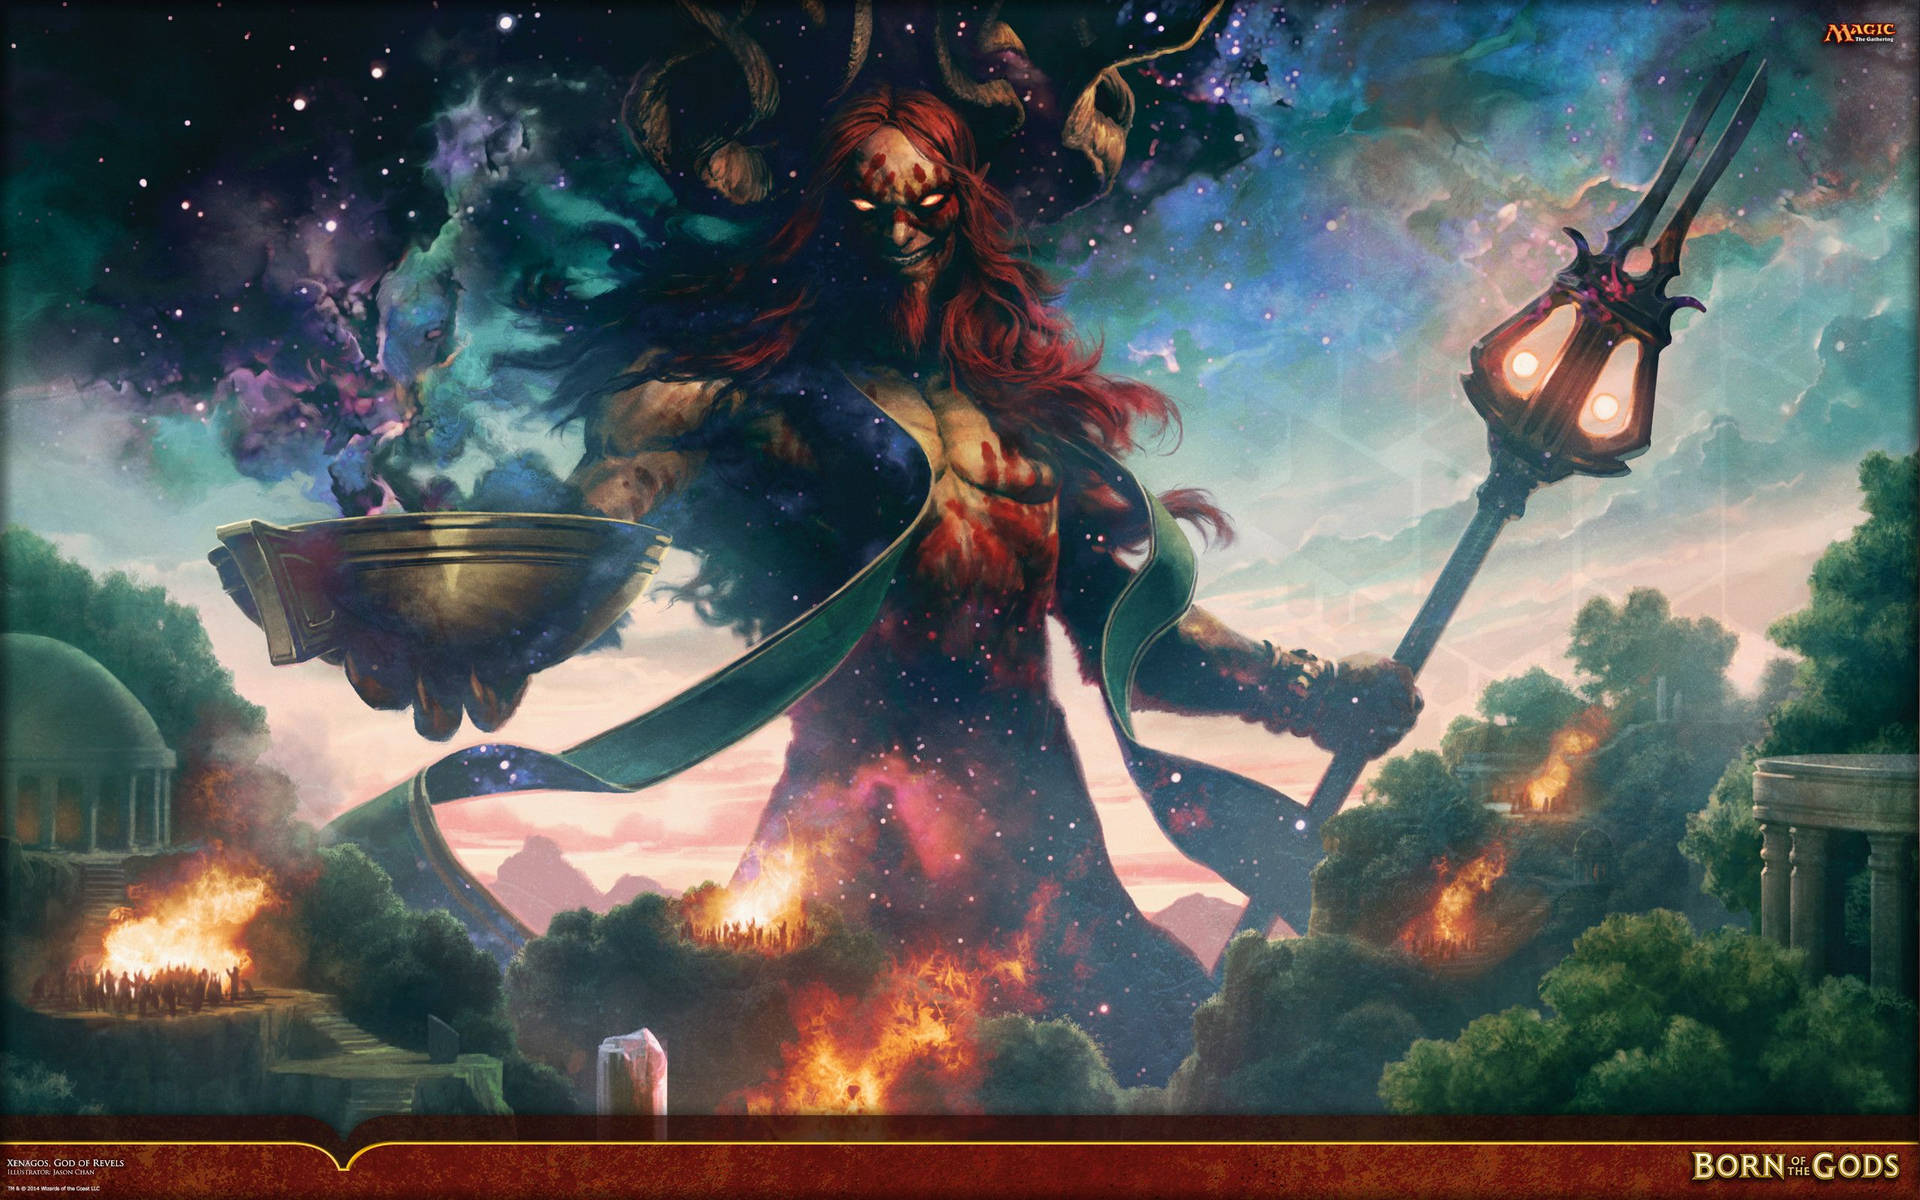 "Embrace the power of darkness with this fearsome demons of Magic: The Gathering!" Wallpaper